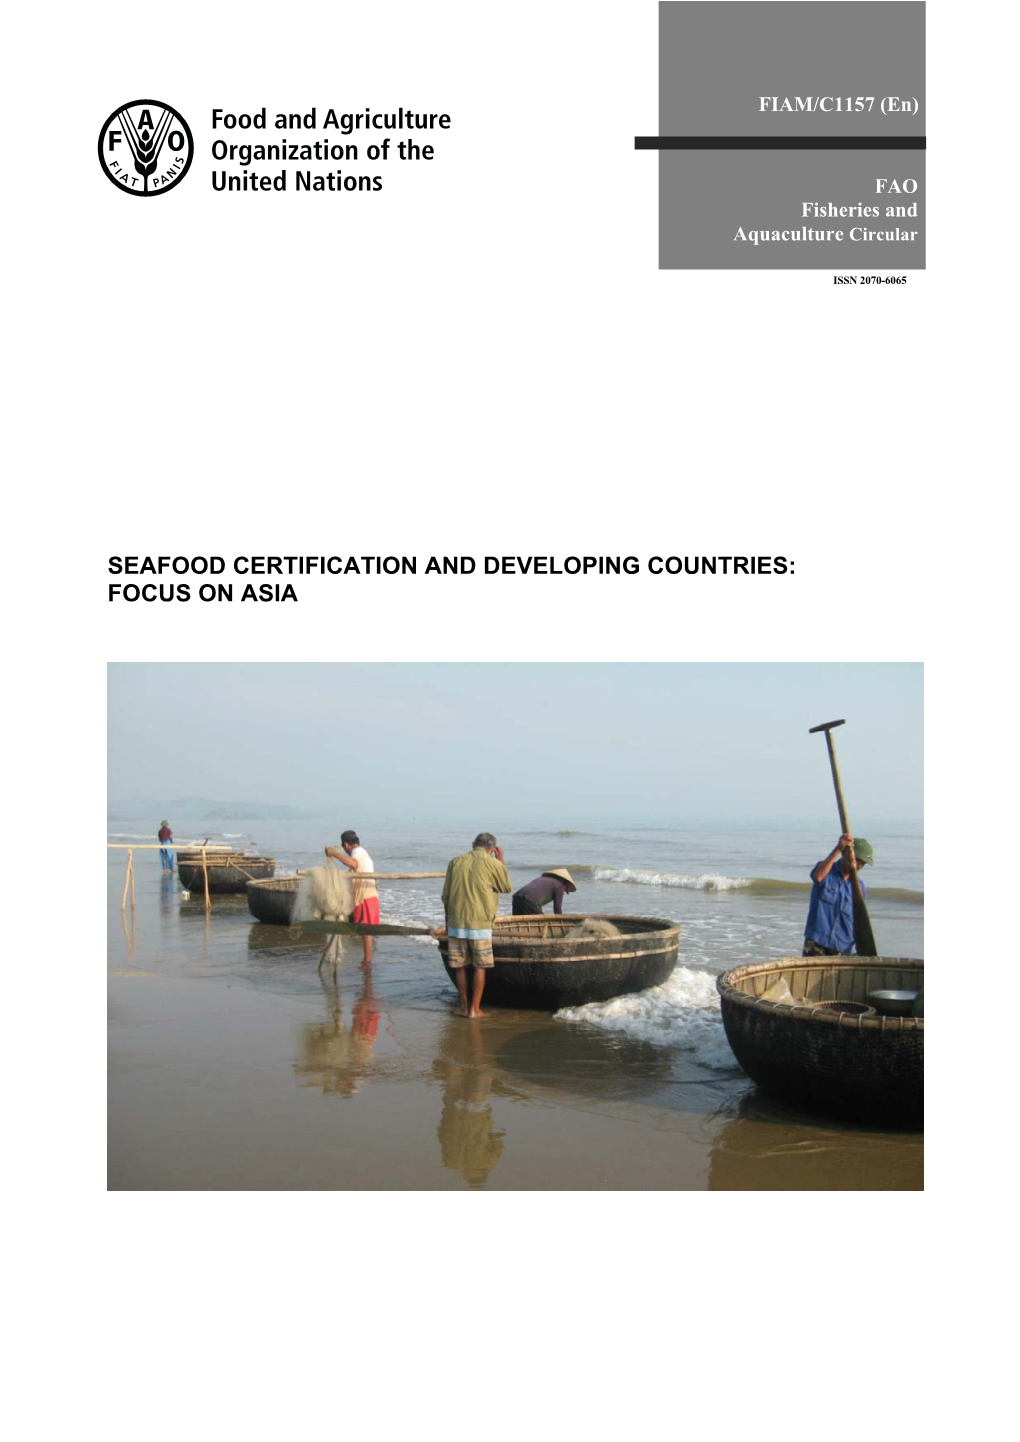 SEAFOOD CERTIFICATION and DEVELOPING COUNTRIES: FOCUS on ASIA Cover Photo: Small-Scale Fishers, Vinh City, Viet Nam